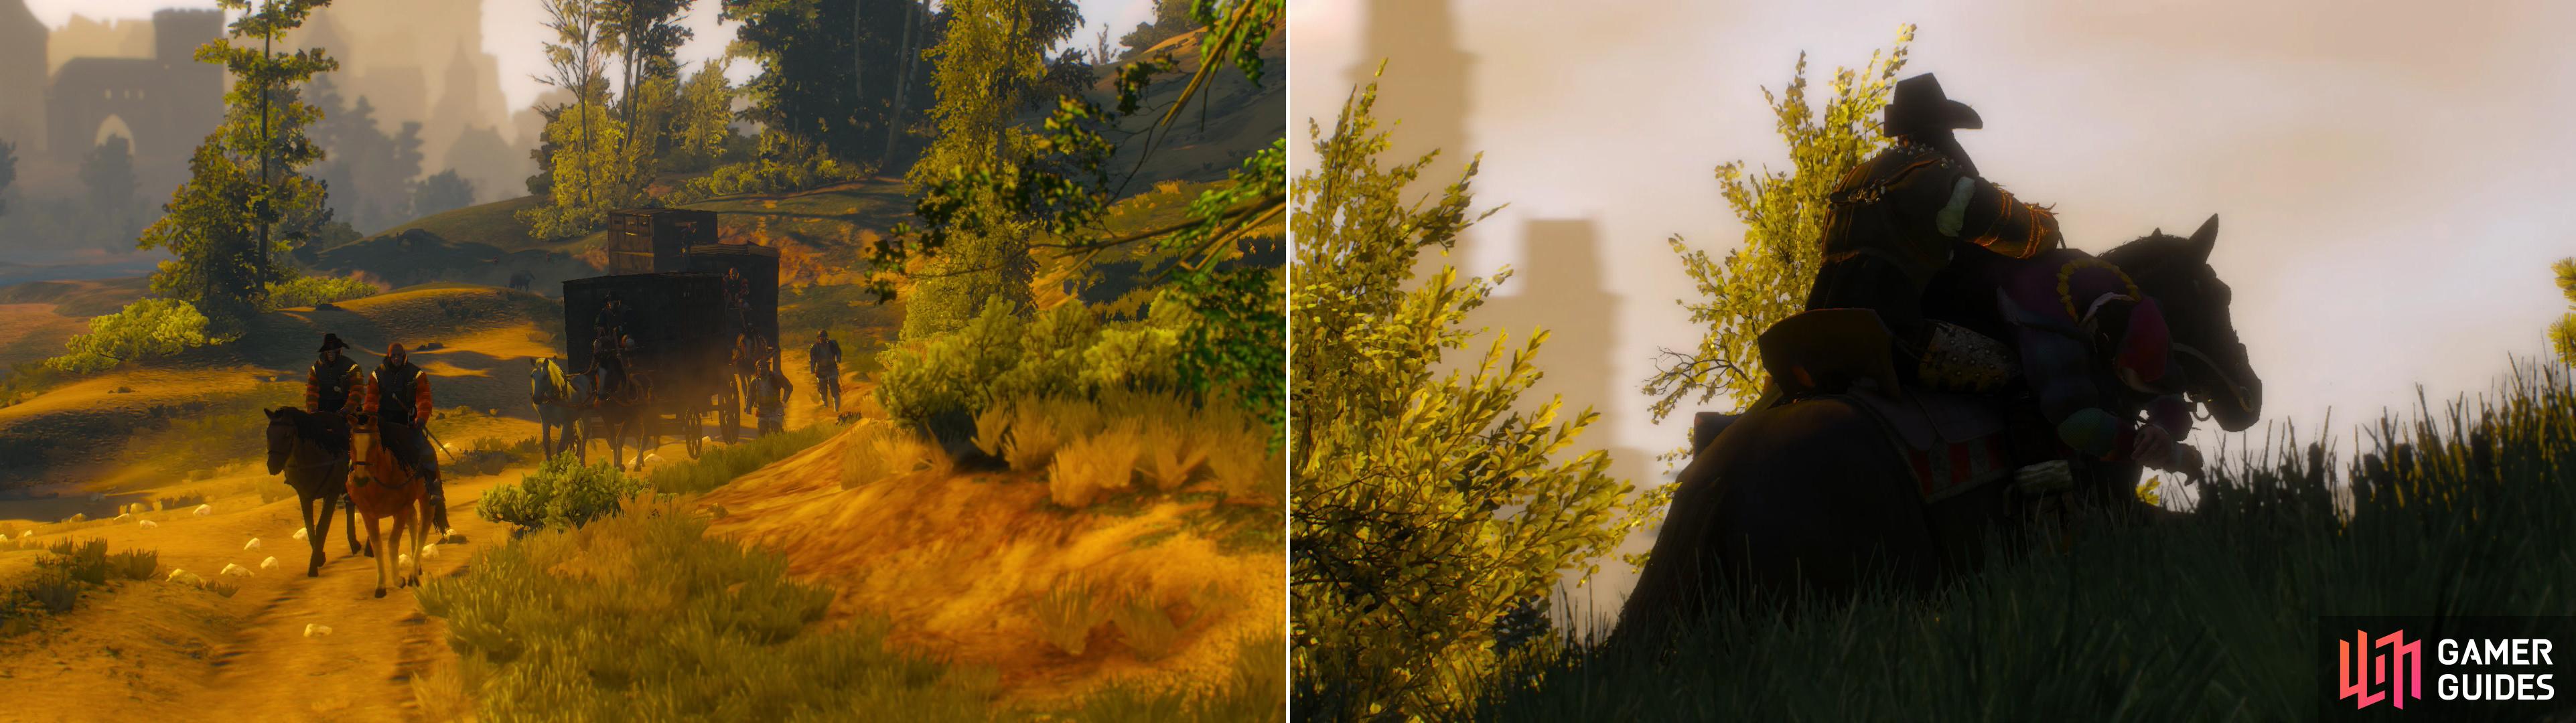 Wait for Dandelion’s escort to arrive before launching your attack (left) then chase the Witch Hunter who makes off with Dandelion (right).